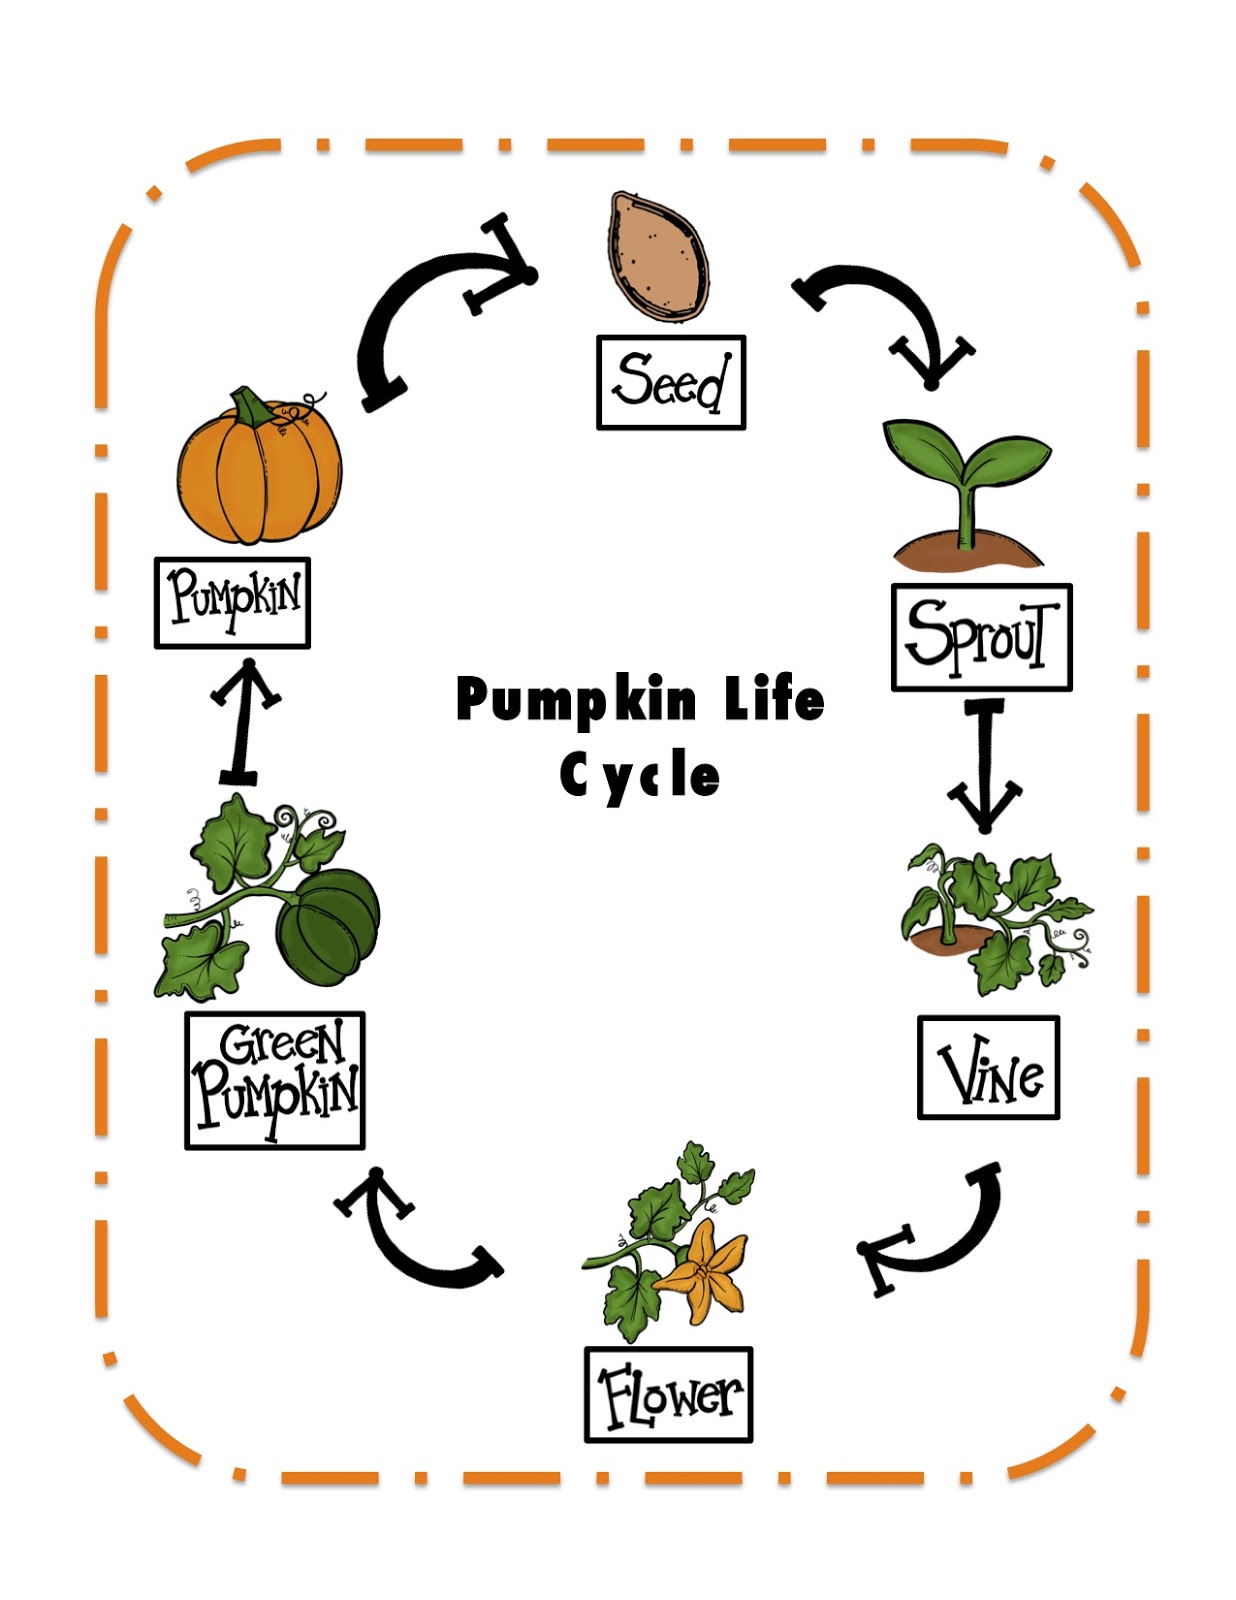 What Is The Life Cycle Of A Pumpkin